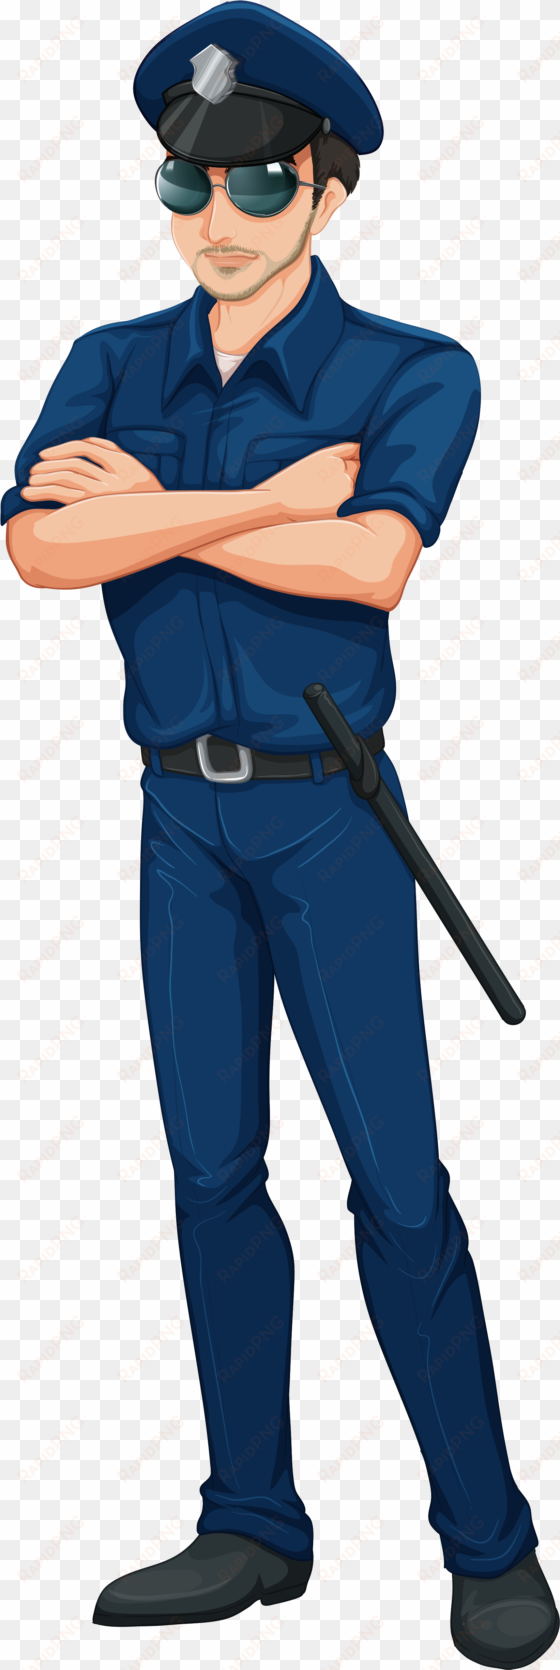 police png clipart